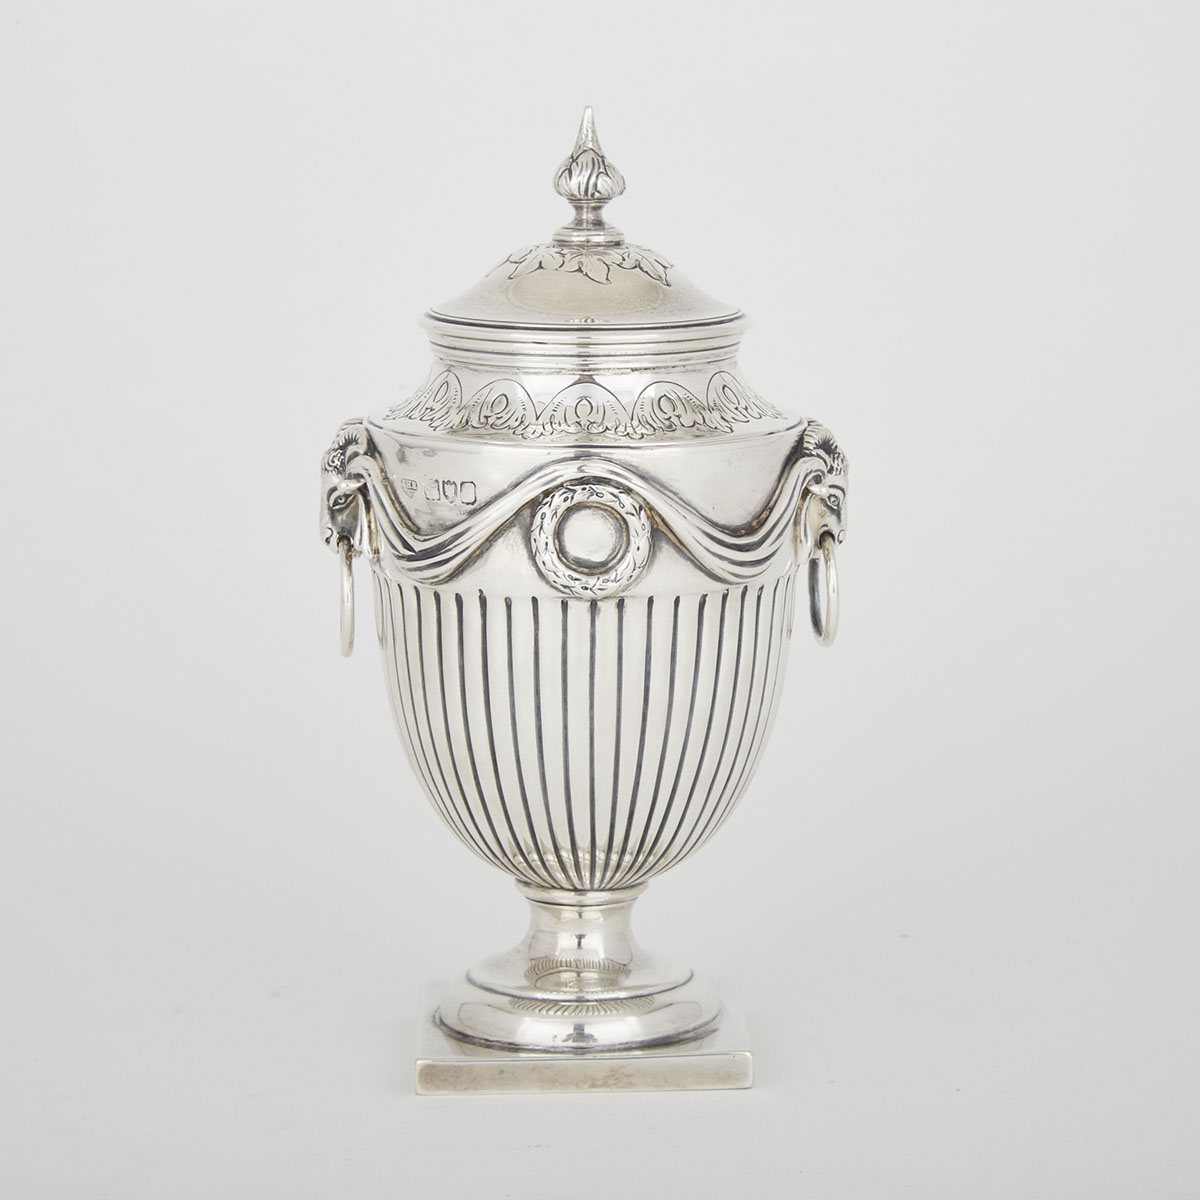 Edwardian Silver Two-Handled Vase and Cover, John Henry Rawlings, London, 1902